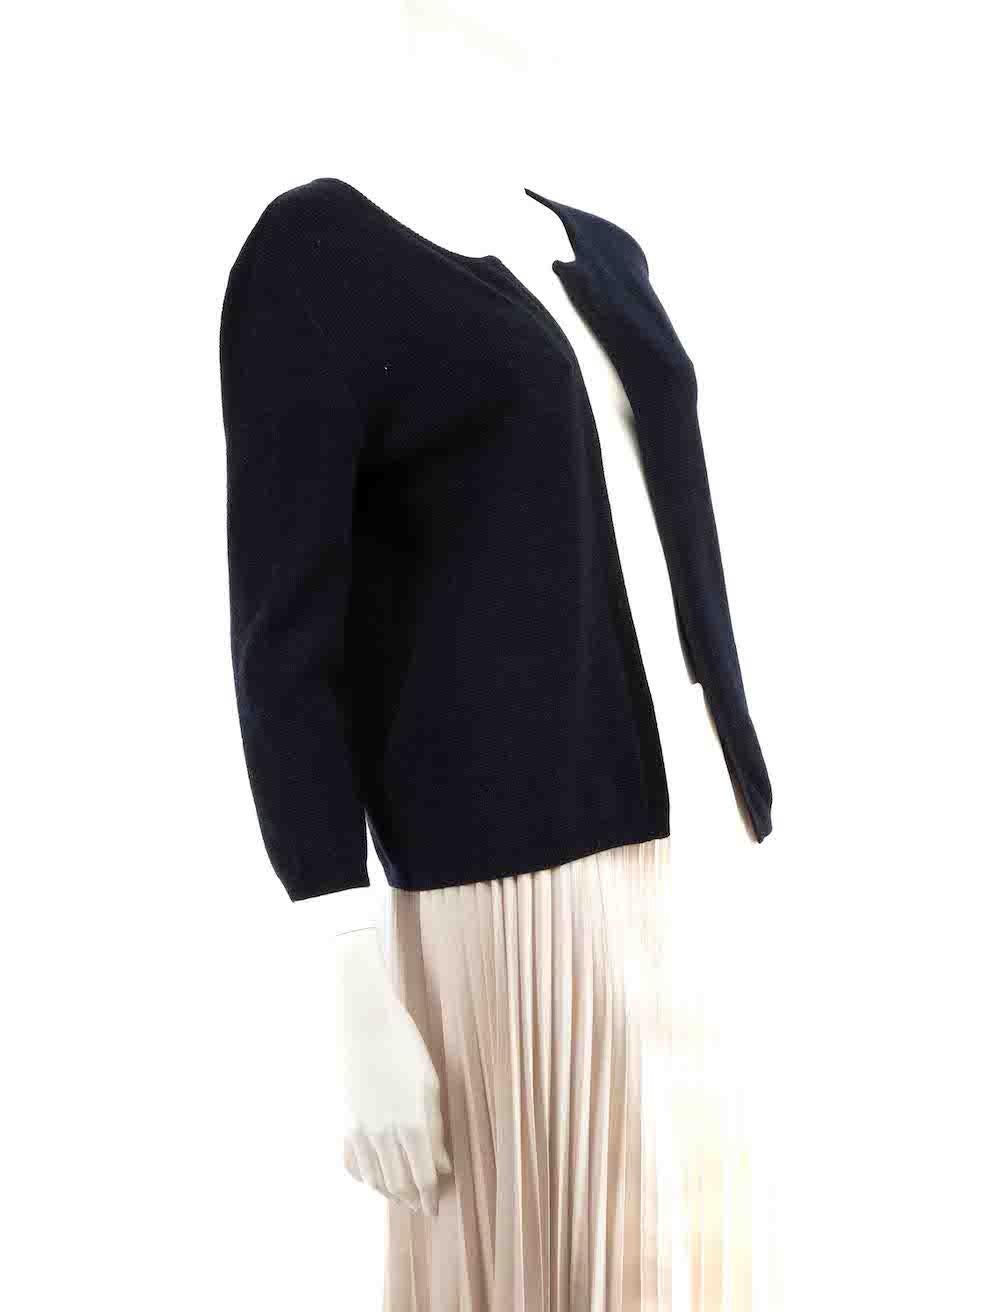 CONDITION is Very good. Hardly any visible wear to cardigan is evident on this used Agnona designer resale item.
 
 
 
 Details
 
 
 Navy
 
 Cashmere
 
 Cardigan
 
 Mid sleeves
 
 Knitted and stretchy
 
 Open front
 
 
 
 
 
 Made in Italy
 
 
 
